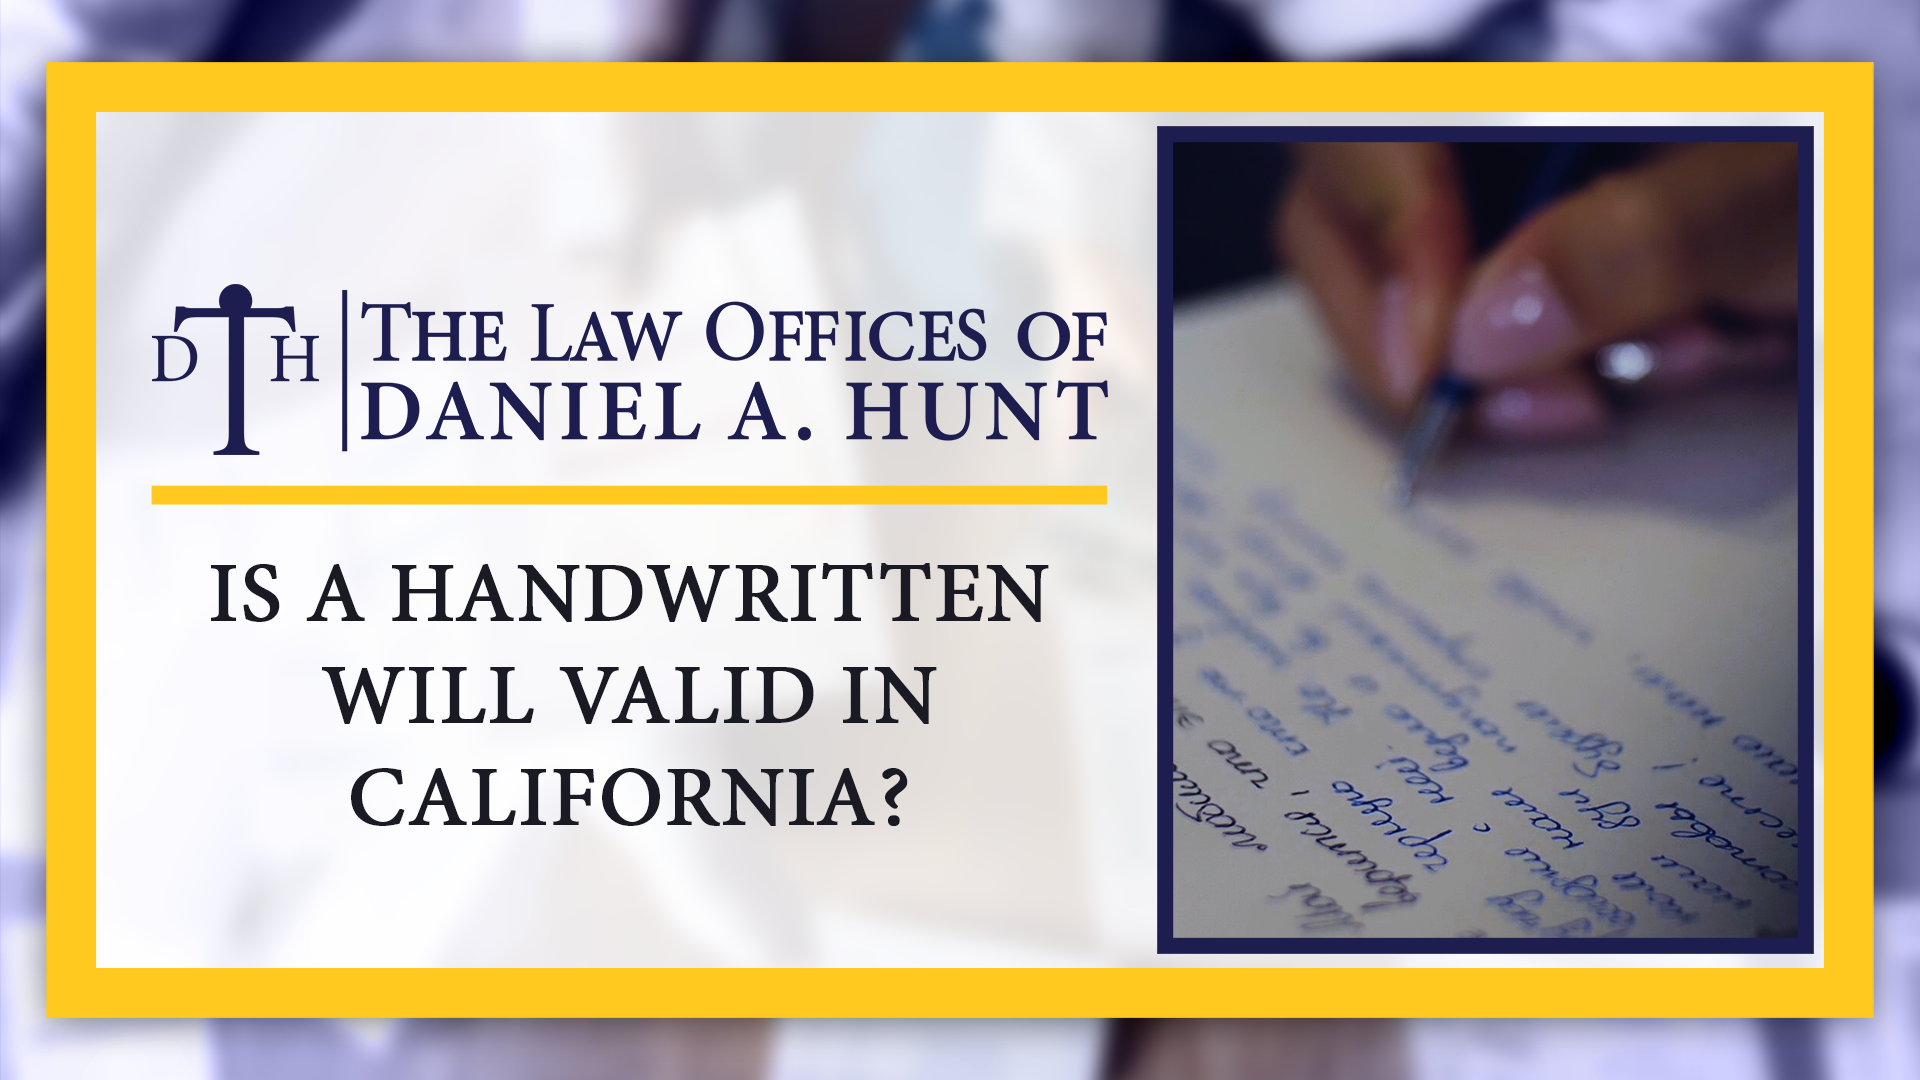 Is a handwritten will valid in California